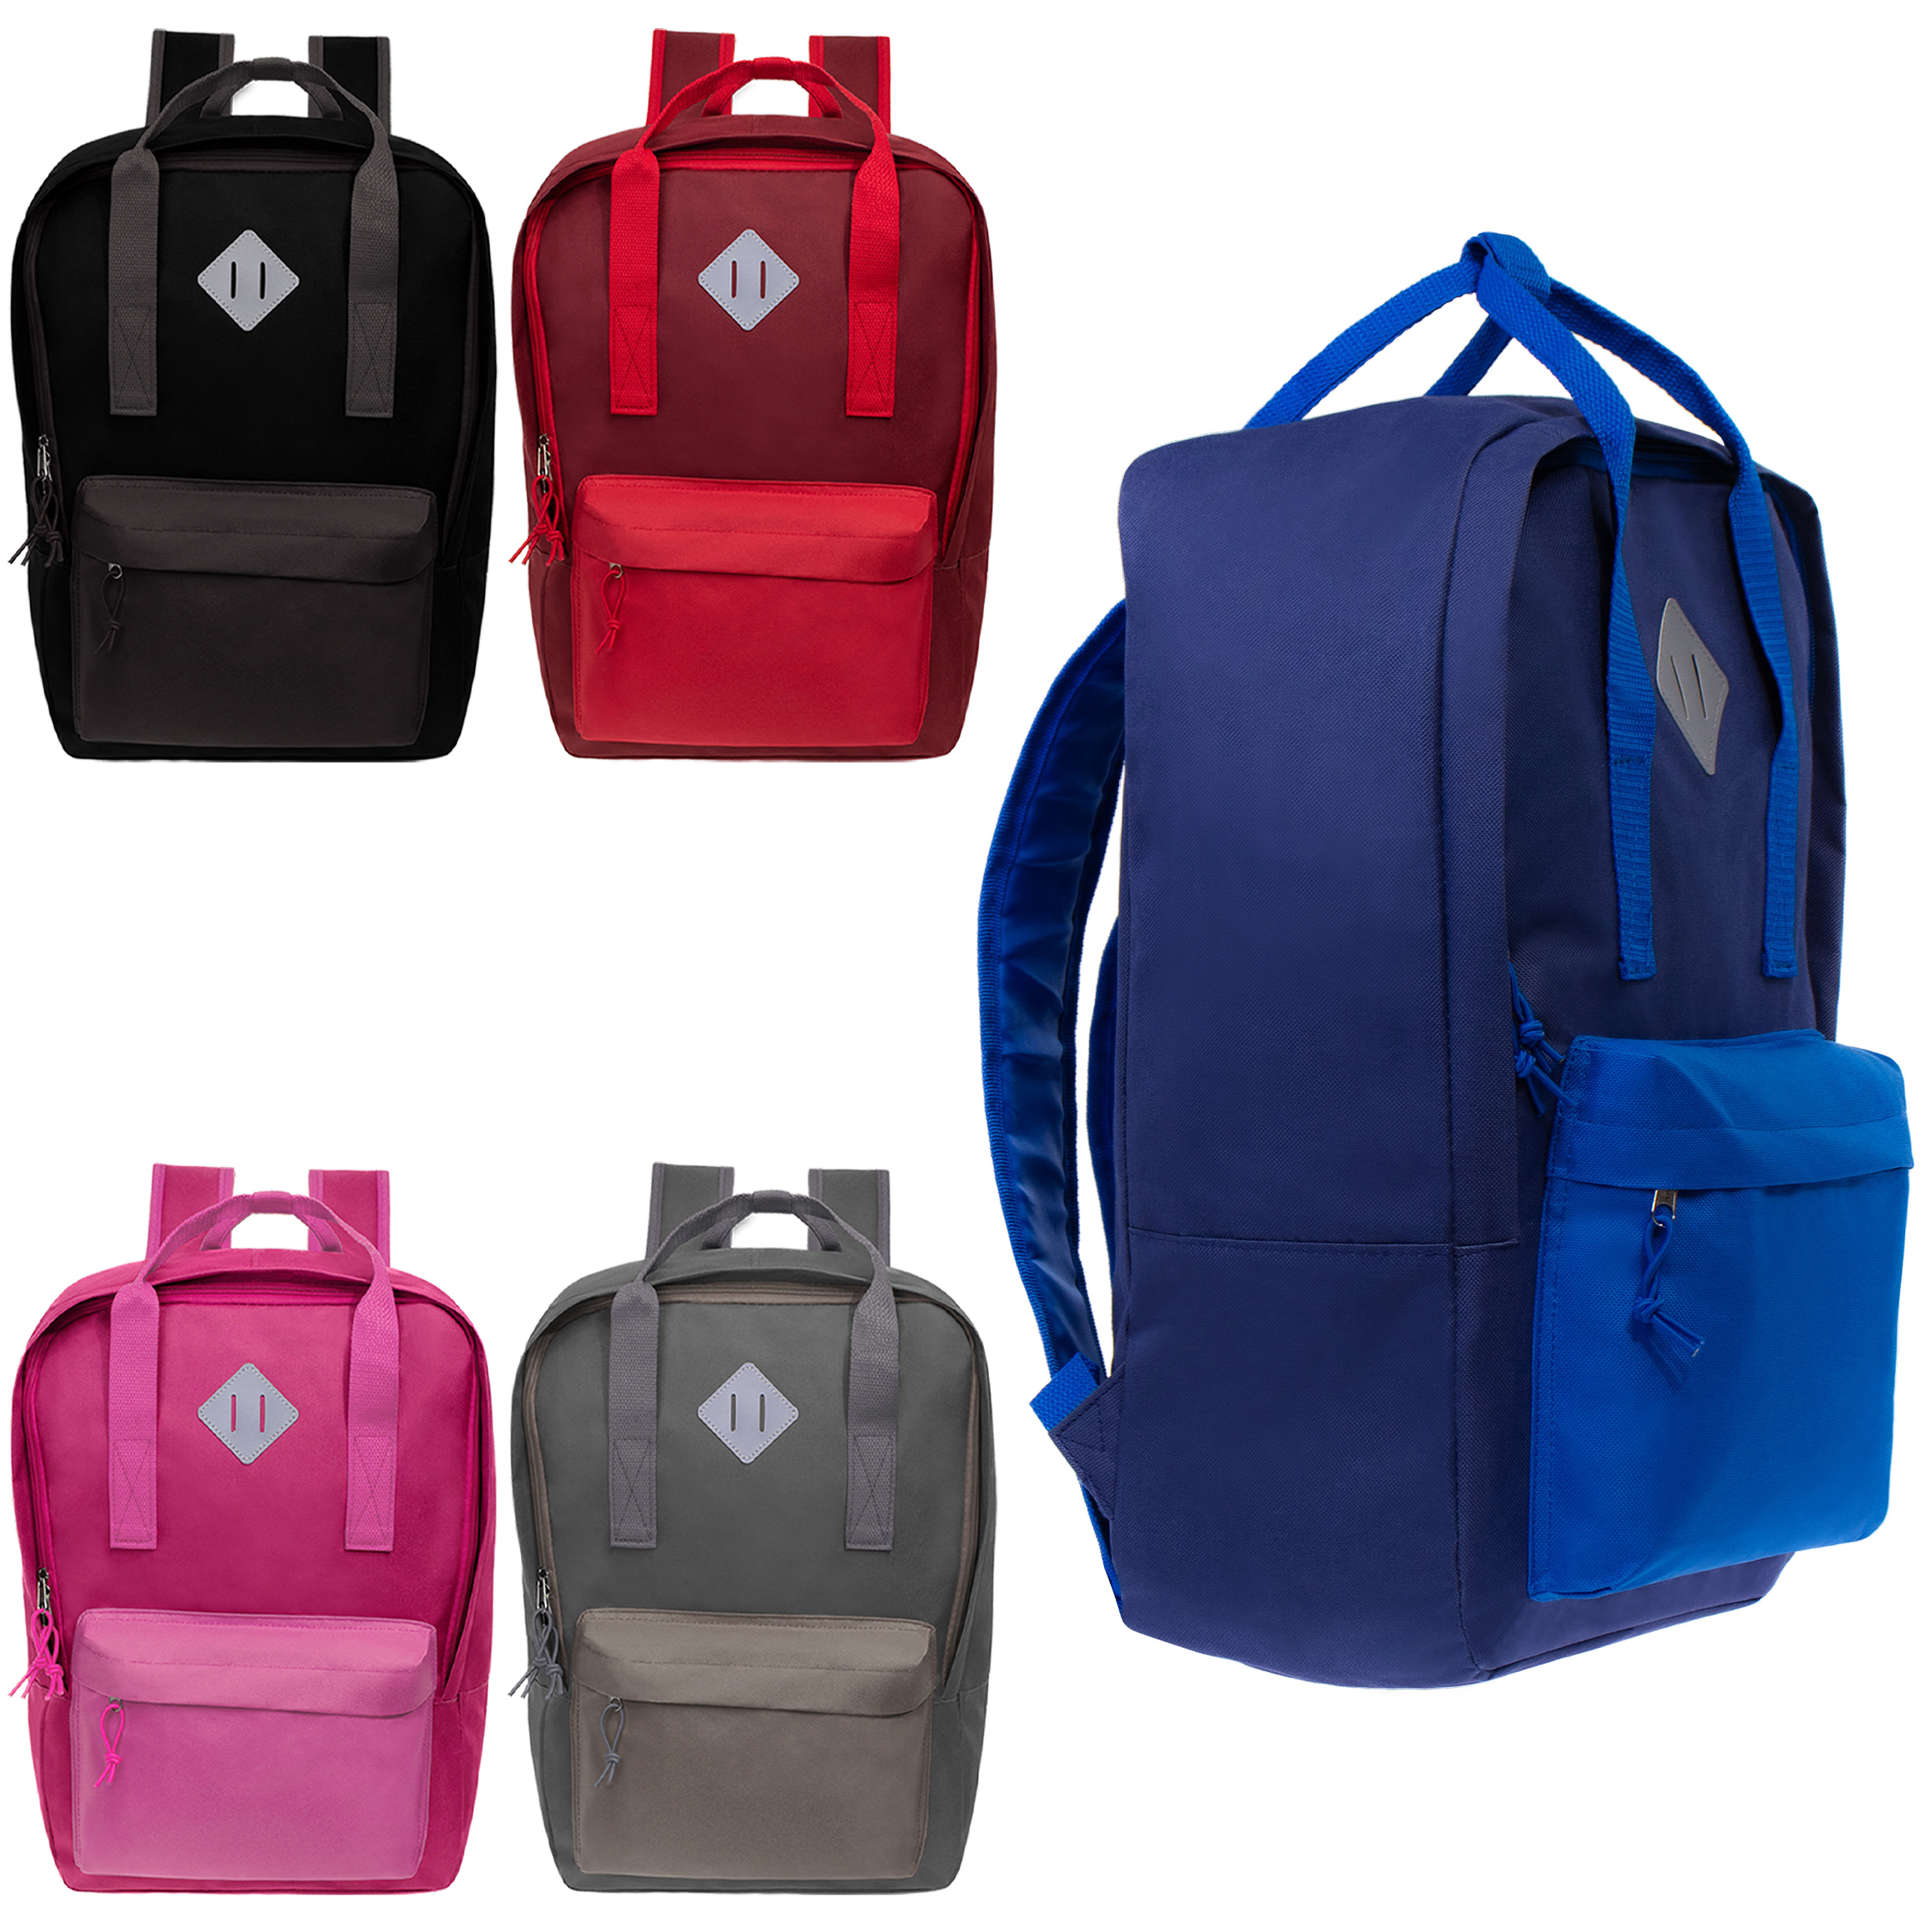 ''17'''' Deluxe BACKPACKs w/ Embroidered Locker Loop - Assorted Colors''